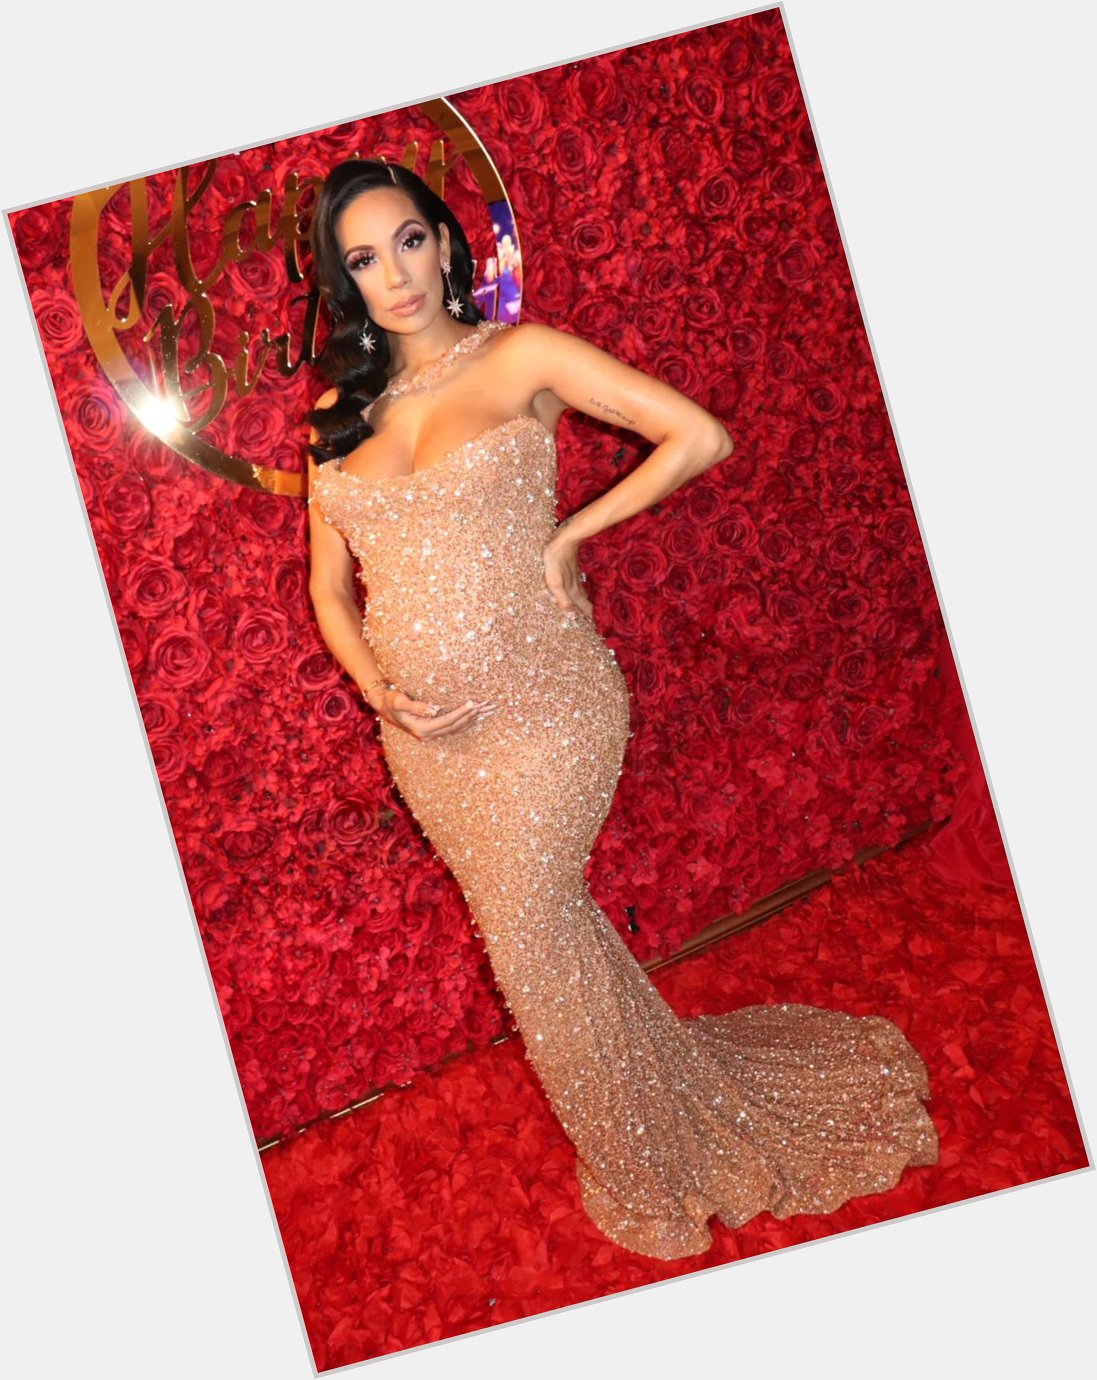 Happy Birthday to Erica Mena, looking very pregnant and beautiful   